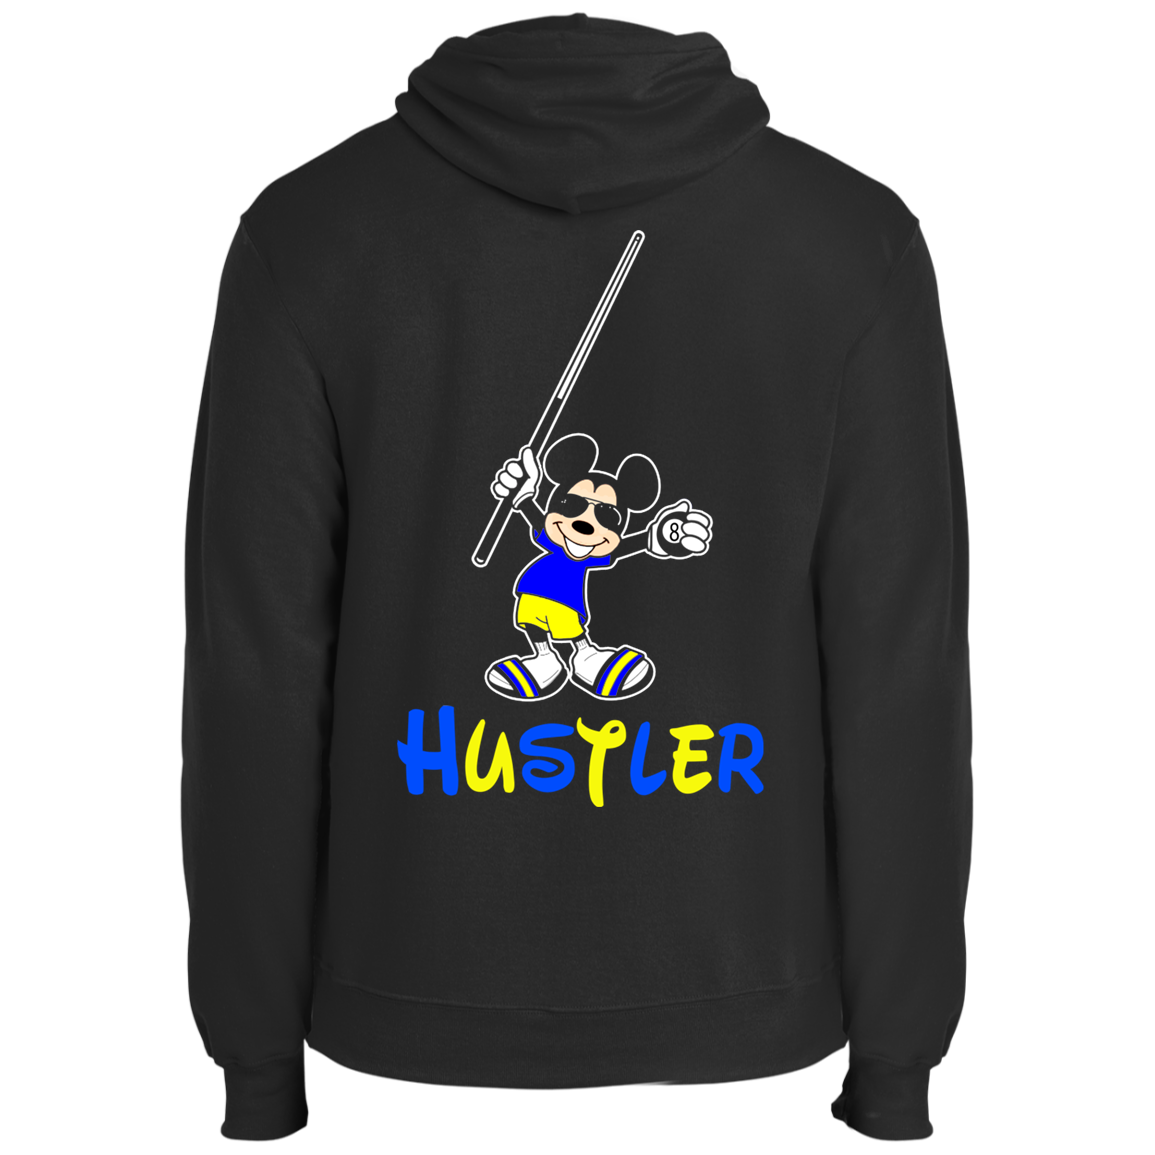 The GHOATS Custom Design #20. Look at the back. Hustle Mouse. Mickey Mouse Fan Art. Fleece Pullover Hoodie